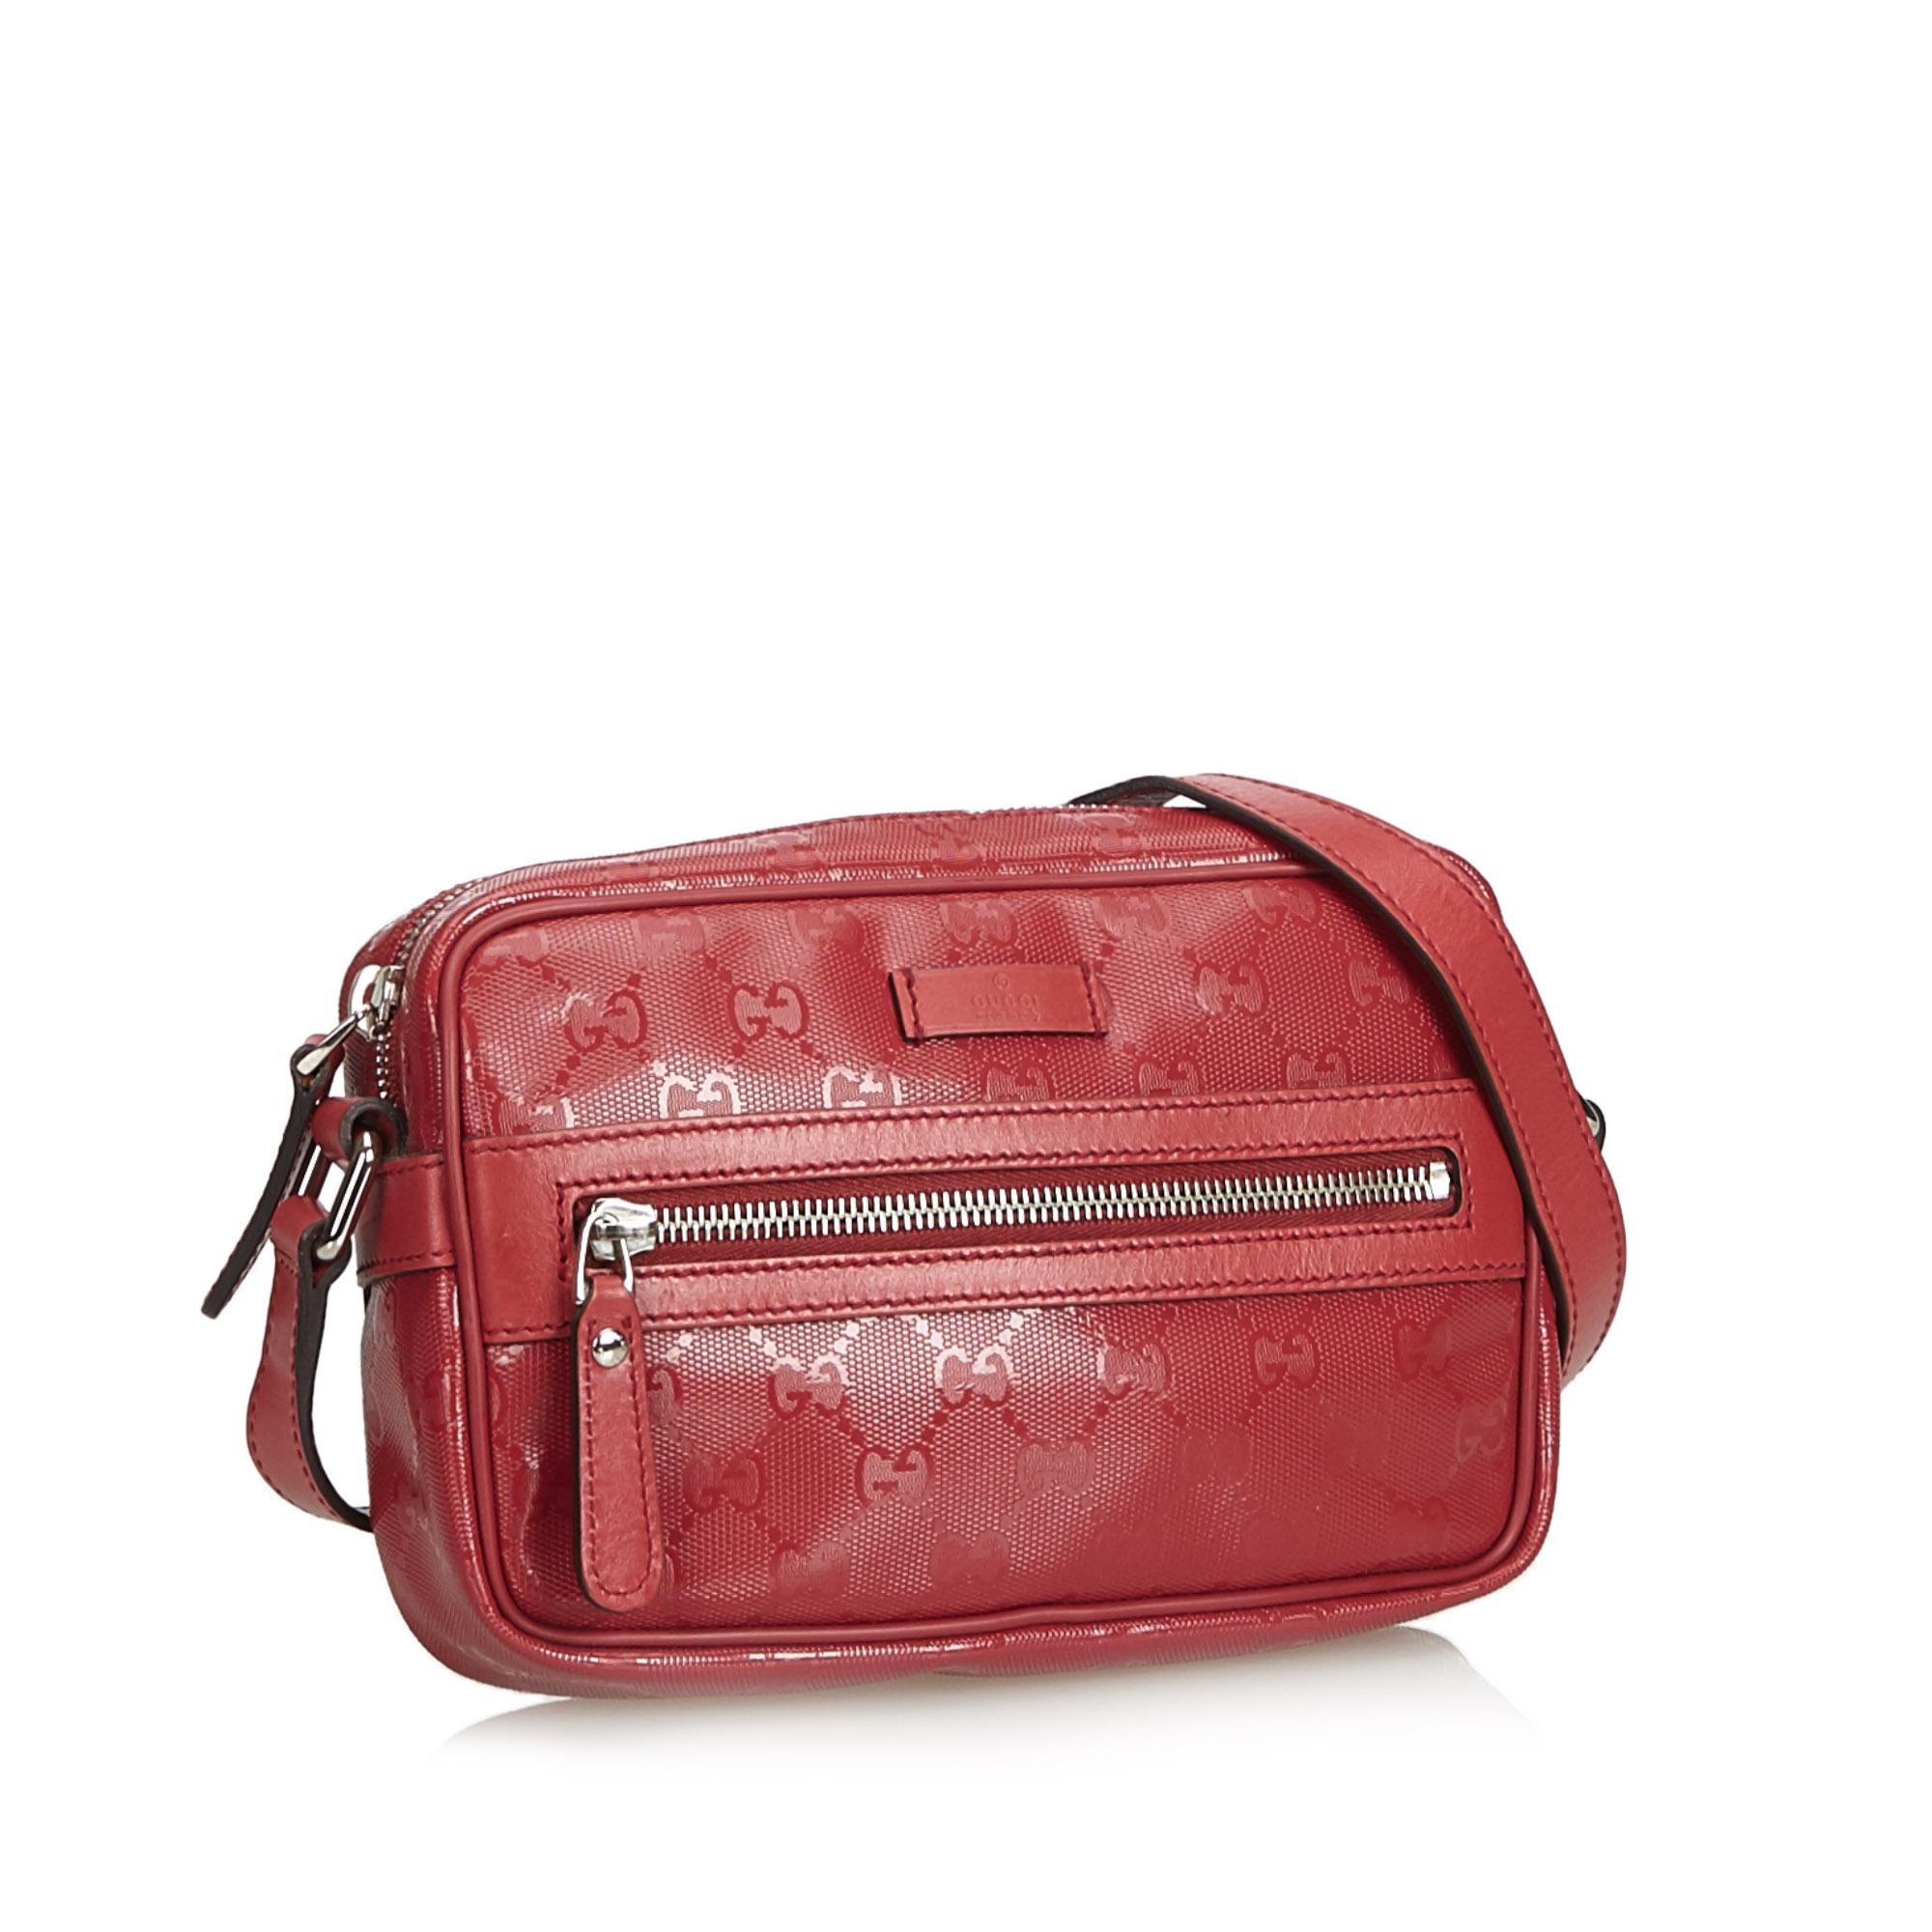 This crossbody bag features a pvc body with leather trim, flat leather strap, top zip closure, exterior zip pocket, and an interior zip pocket. It carries as AB condition rating.

Inclusions: 
This item does not come with